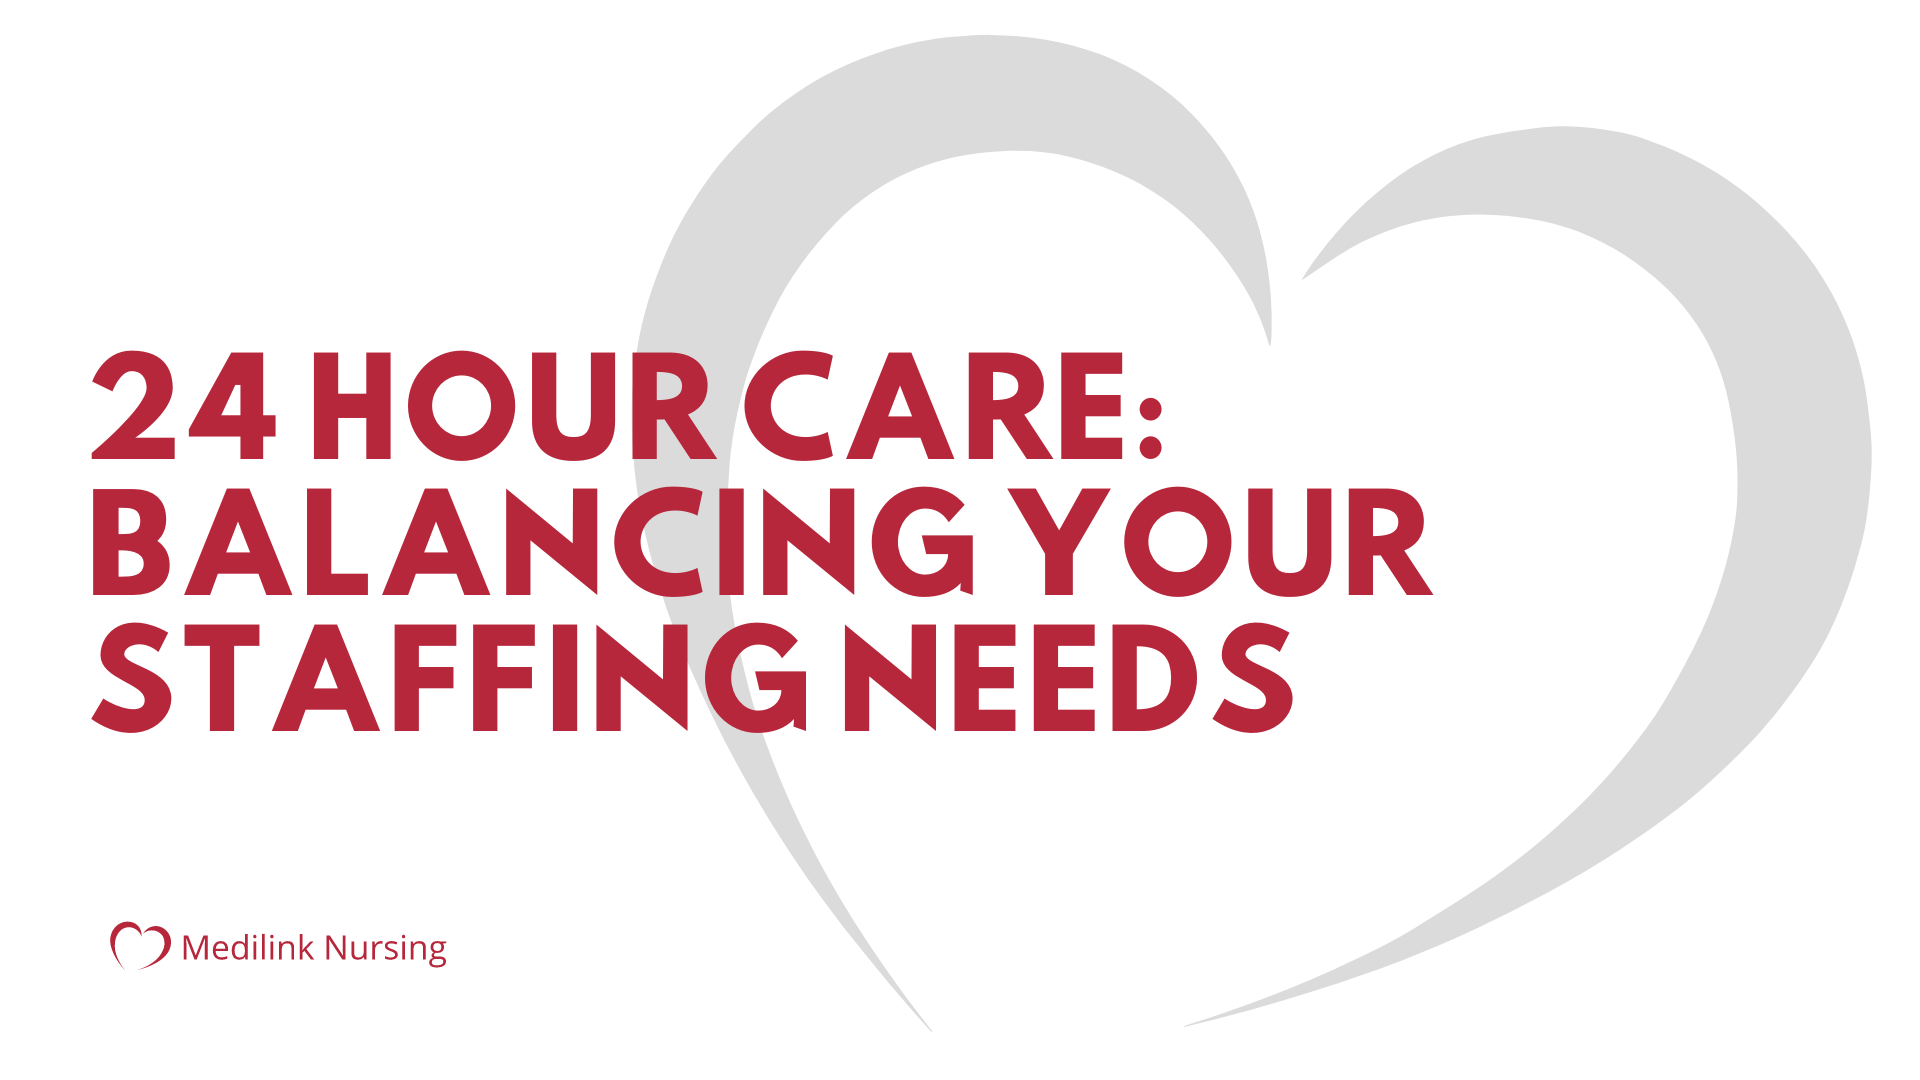 24 Hour Care – Balancing Your Staffing Needs